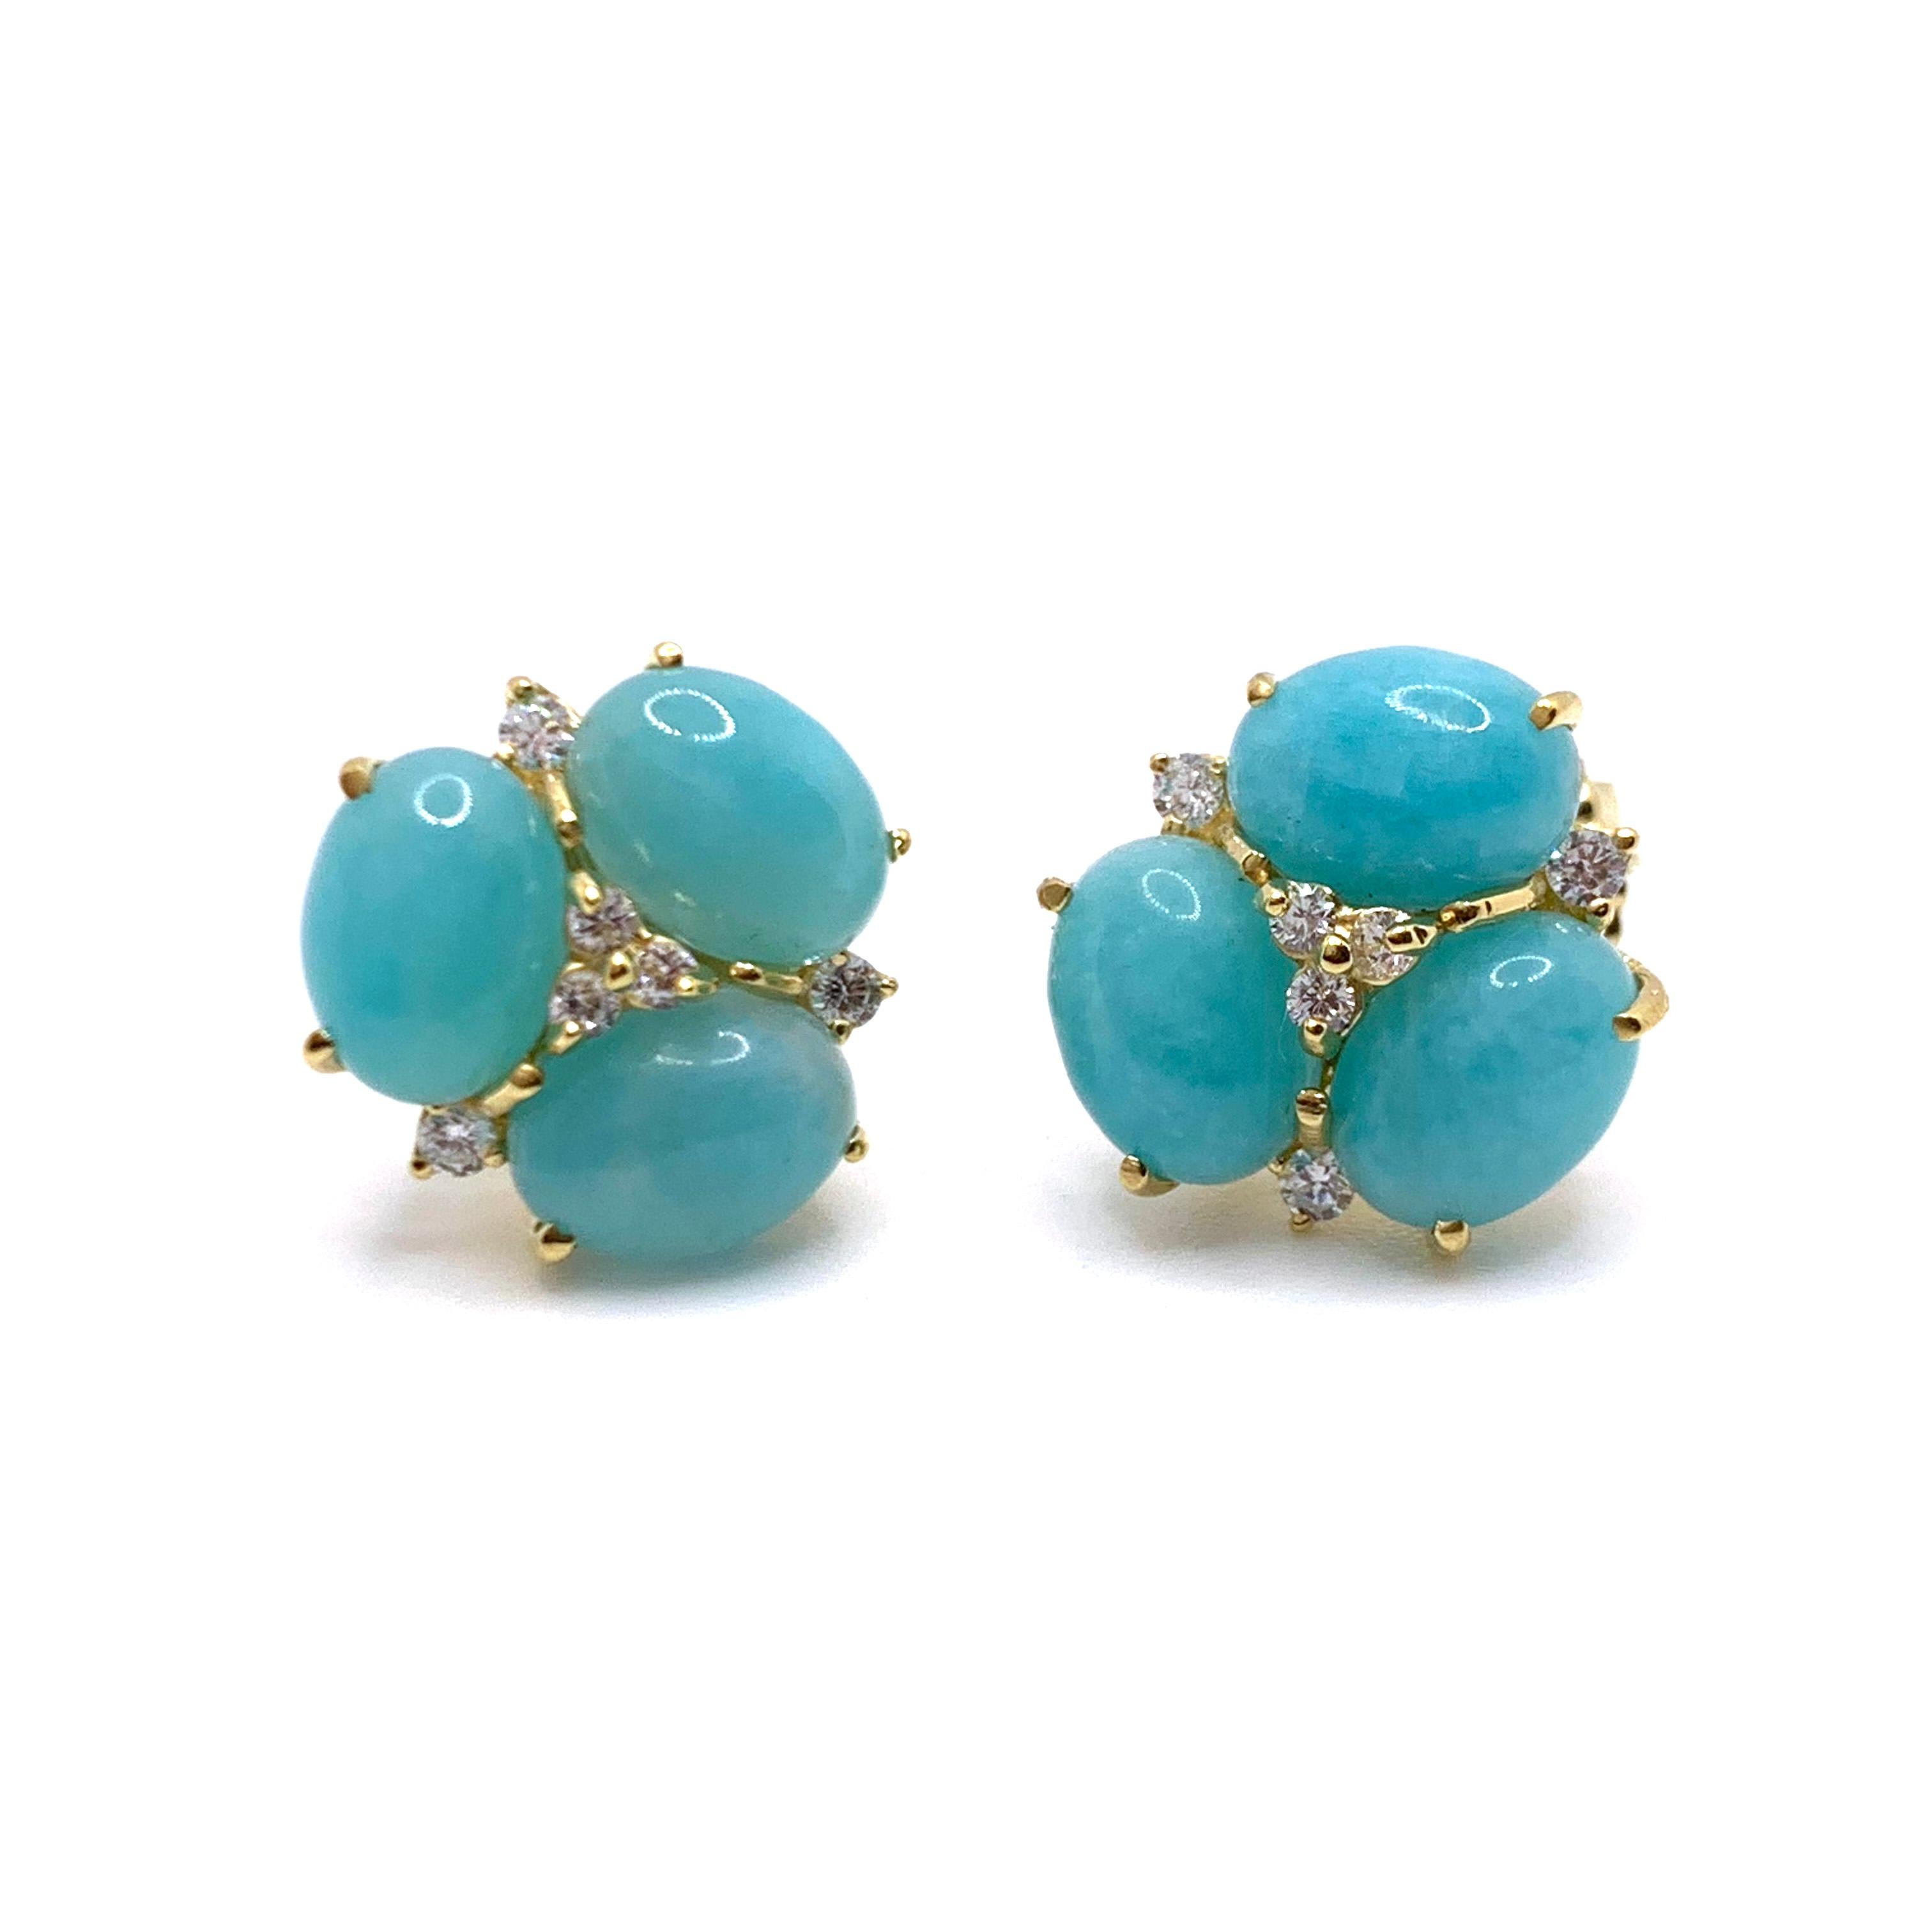 These stunning pair of earrings feature sets of oval cabochon-cut amazonite adorned with round simulated diamonds, handset in 18k yellow gold vermeil over sterling silver. The amazonite offer rich blue-green hue with unique beautiful color almost